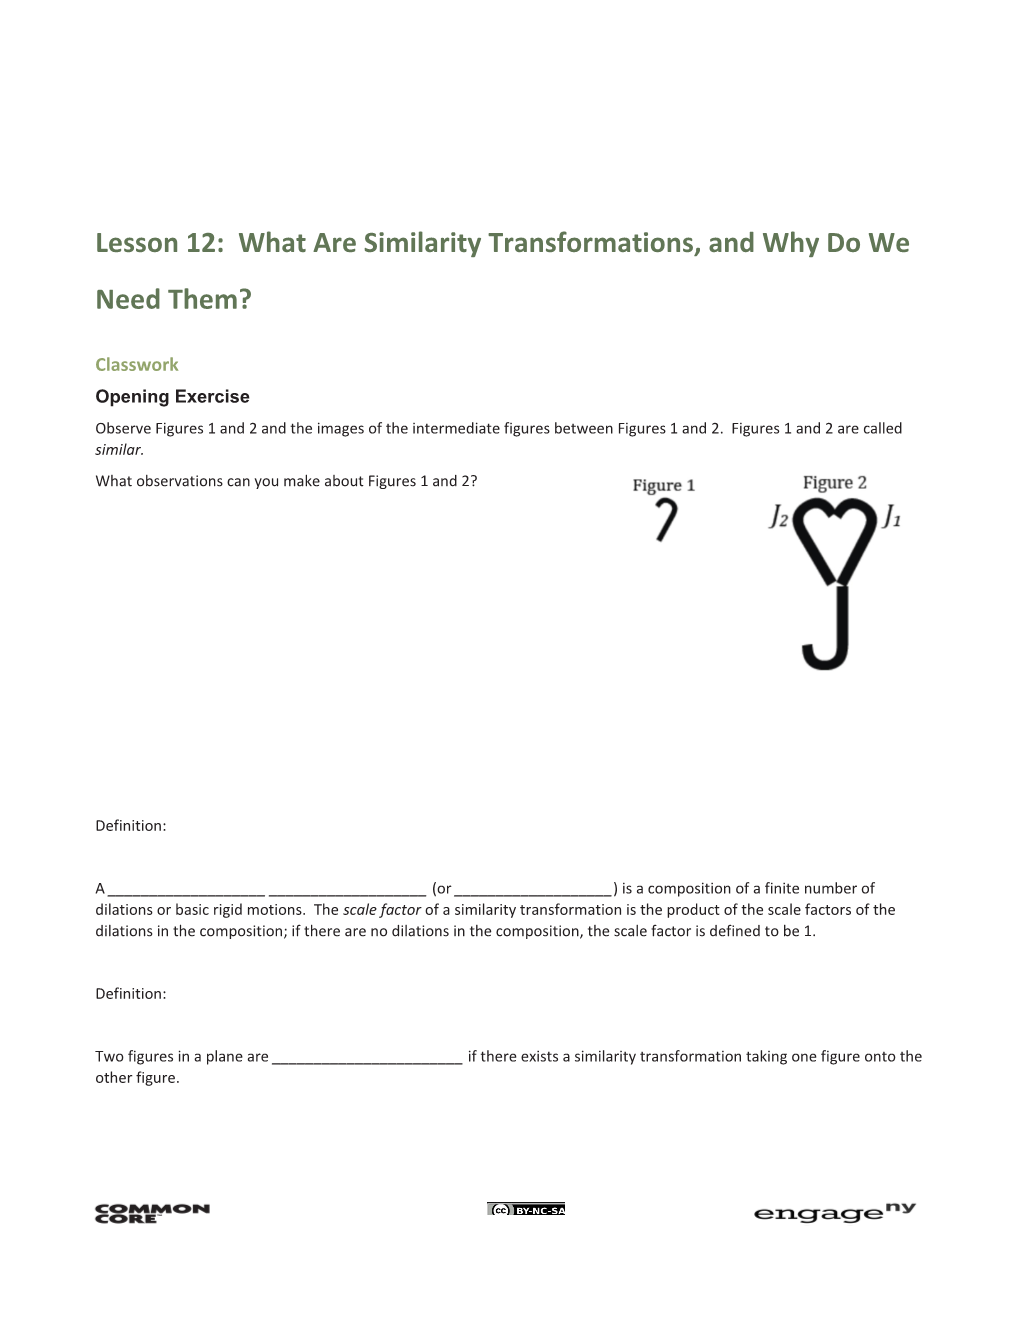 Lesson 12: What Are Similarity Transformations, and Why Do We Need Them?